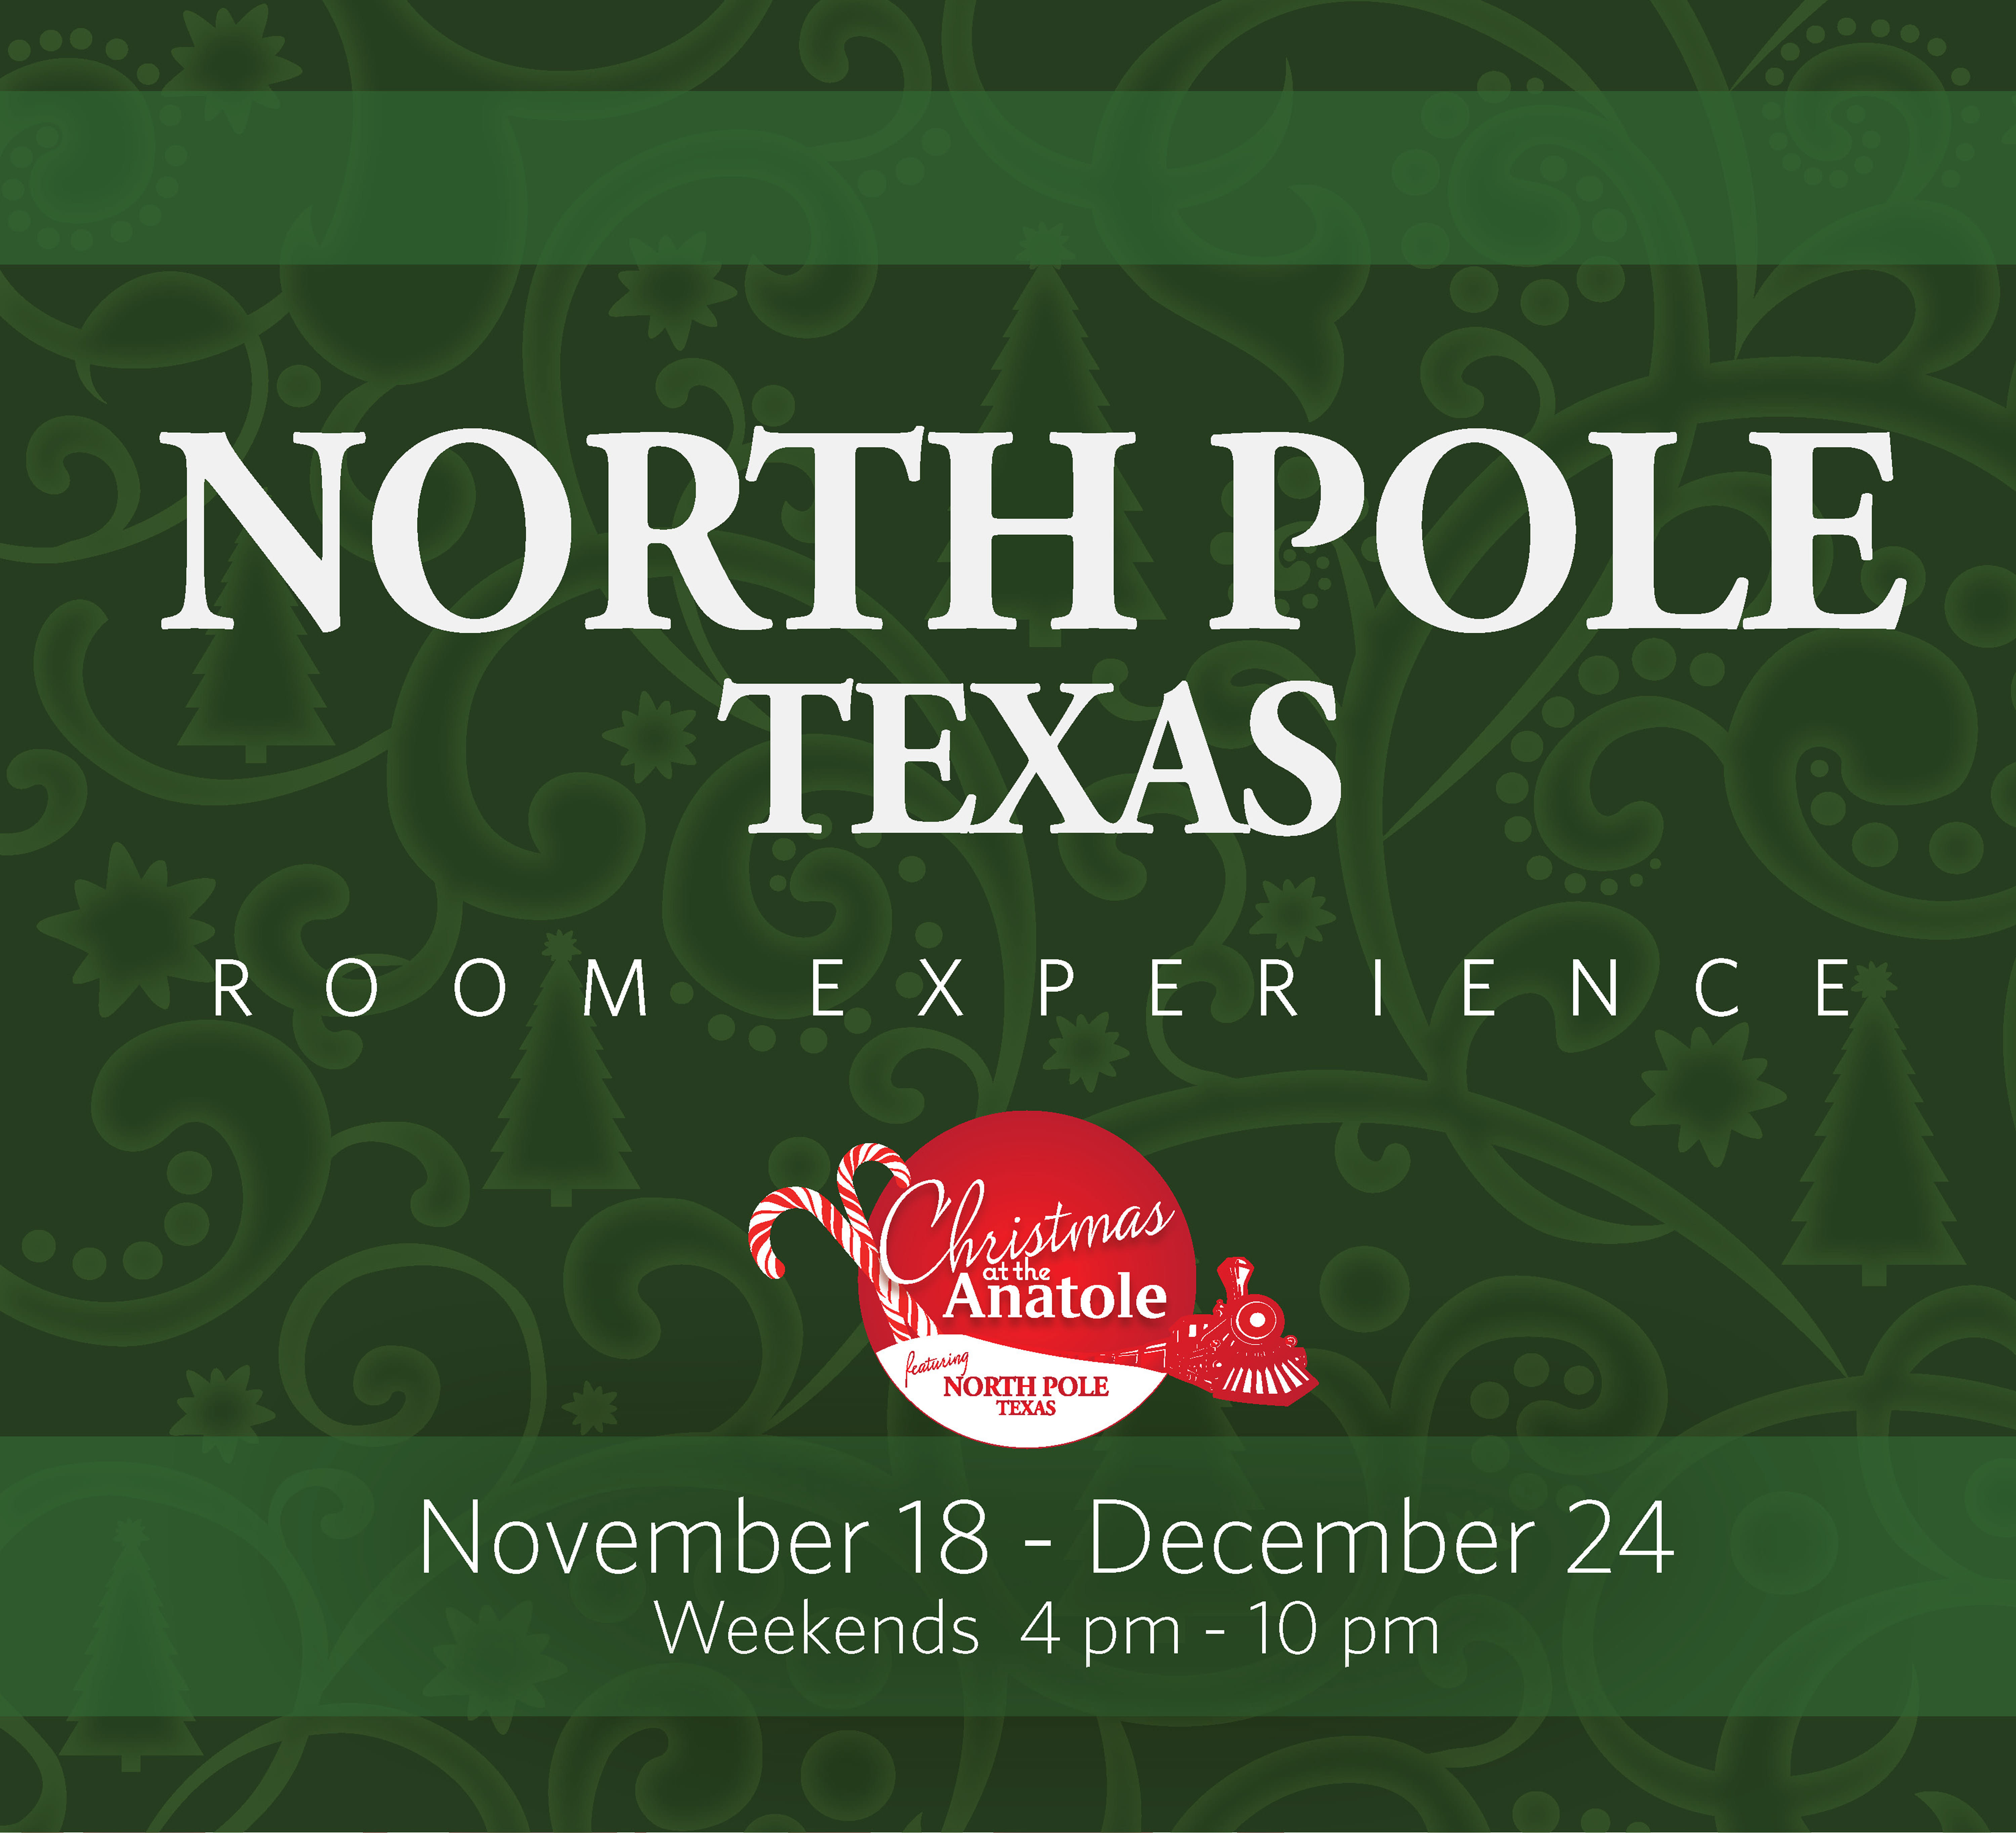 graphic of north pole texas event